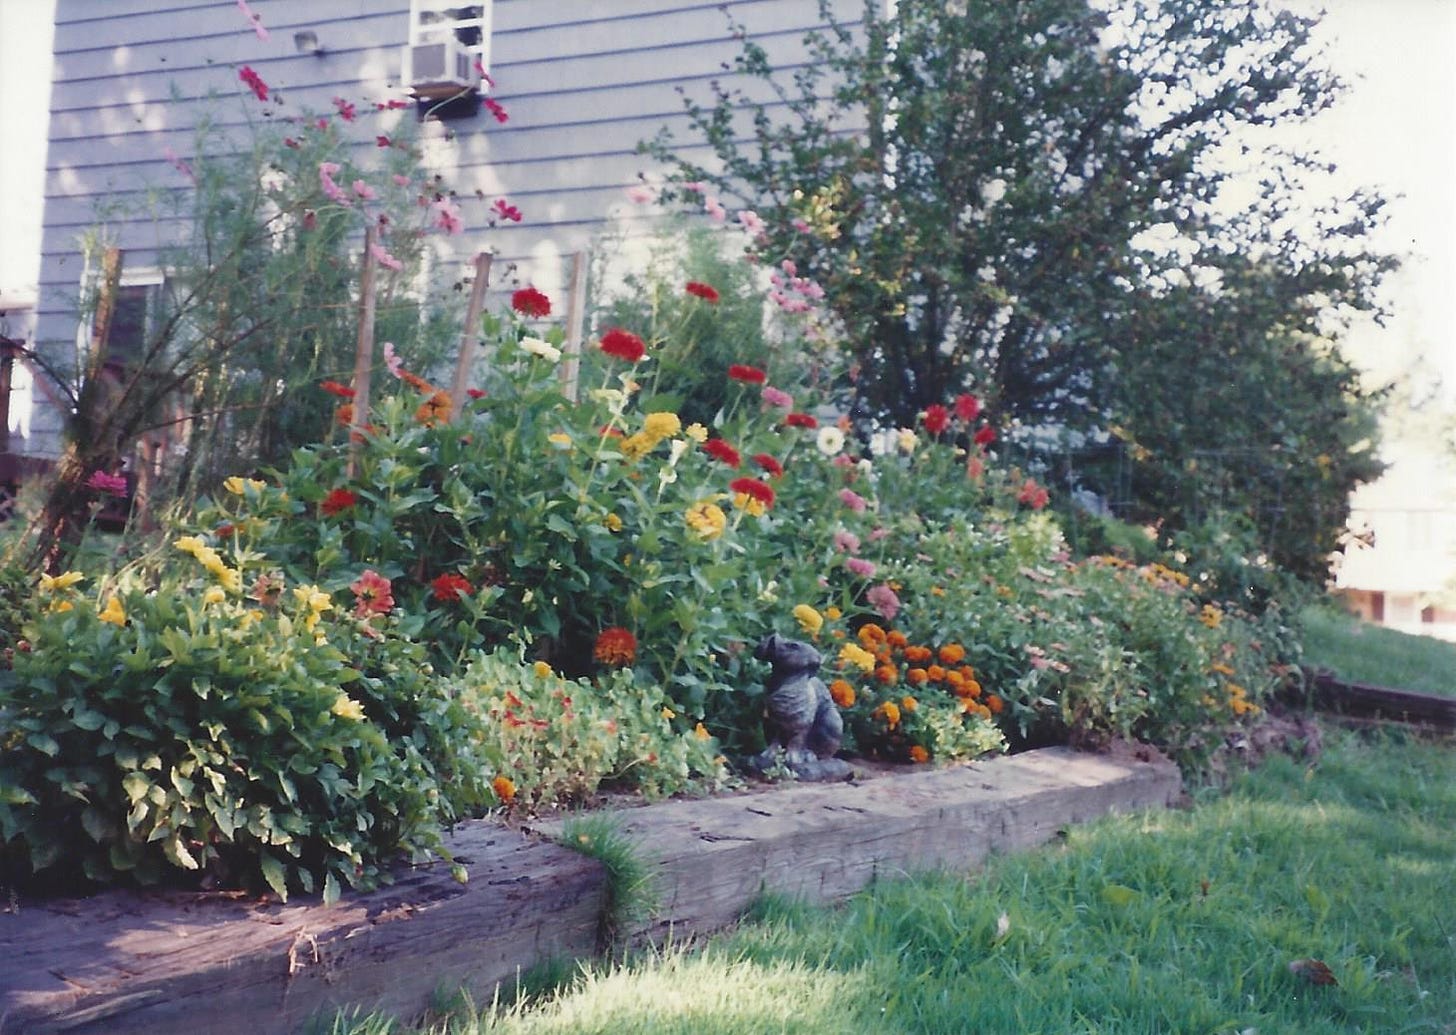 A collection of zinnias, marigolds, dahlias, and cosmos are blooming in abundance in a humble backyard garden edged with old railroad ties